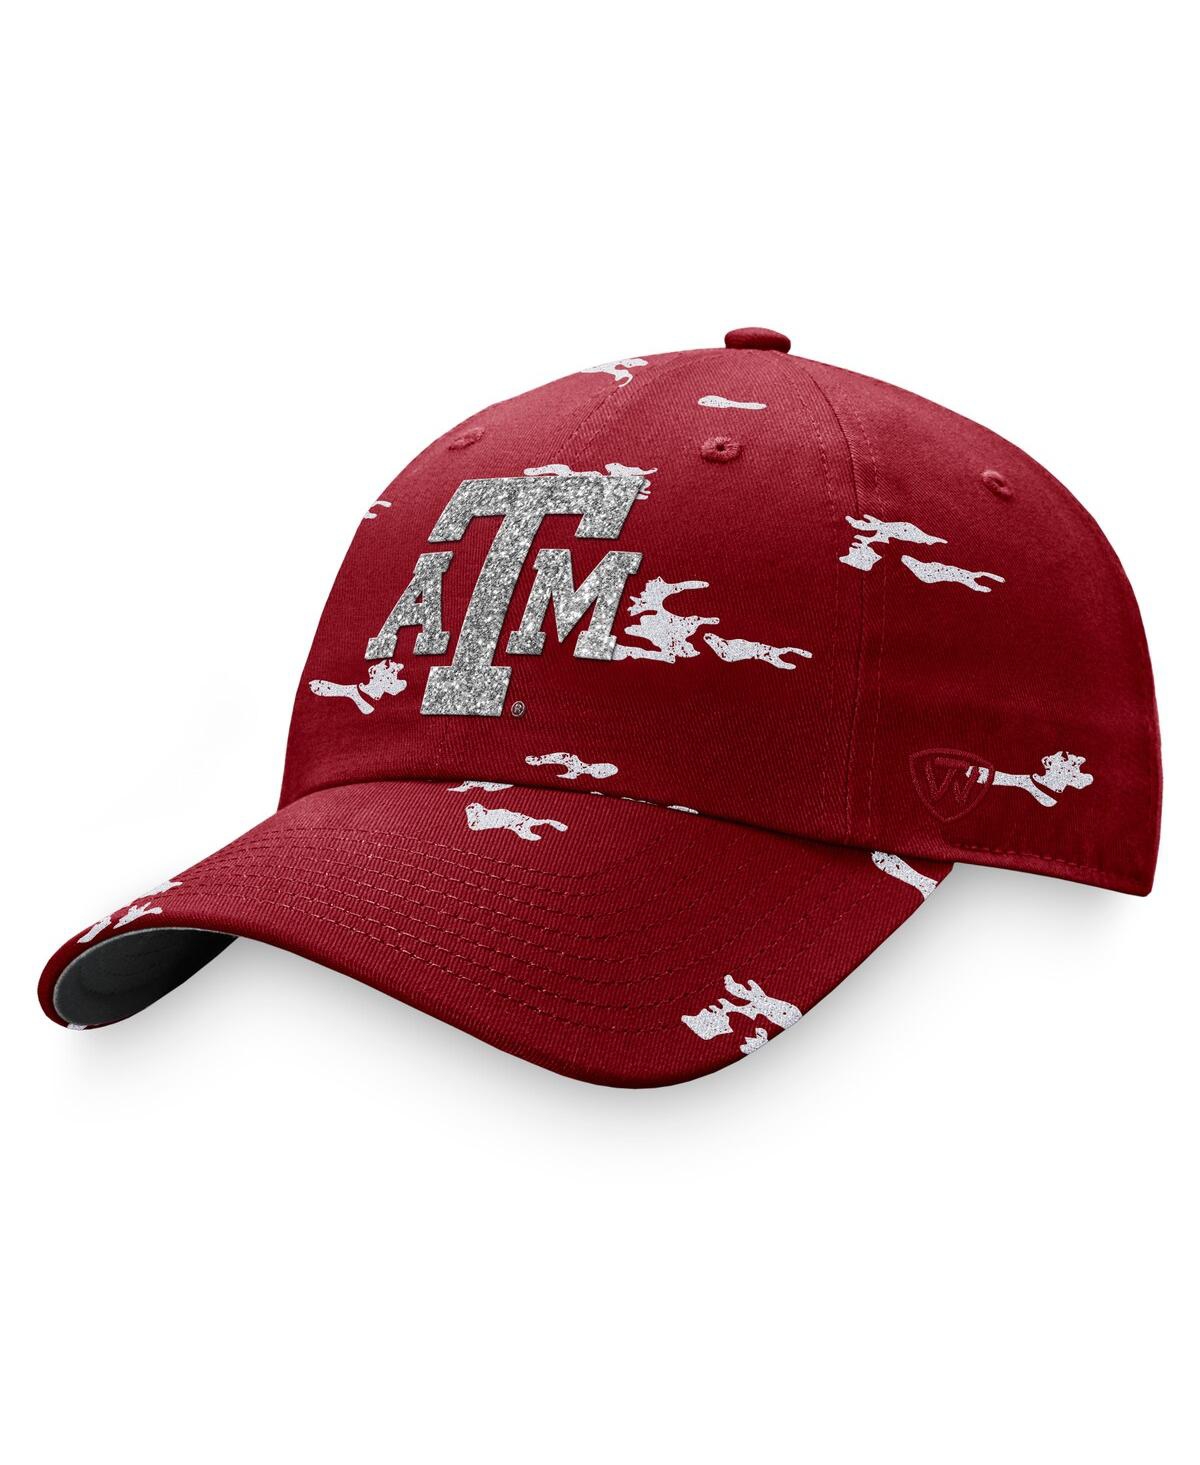 Women's Top of the World Maroon Texas A&M Aggies Oht Military-Inspired Appreciation Betty Adjustable Hat - Maroon